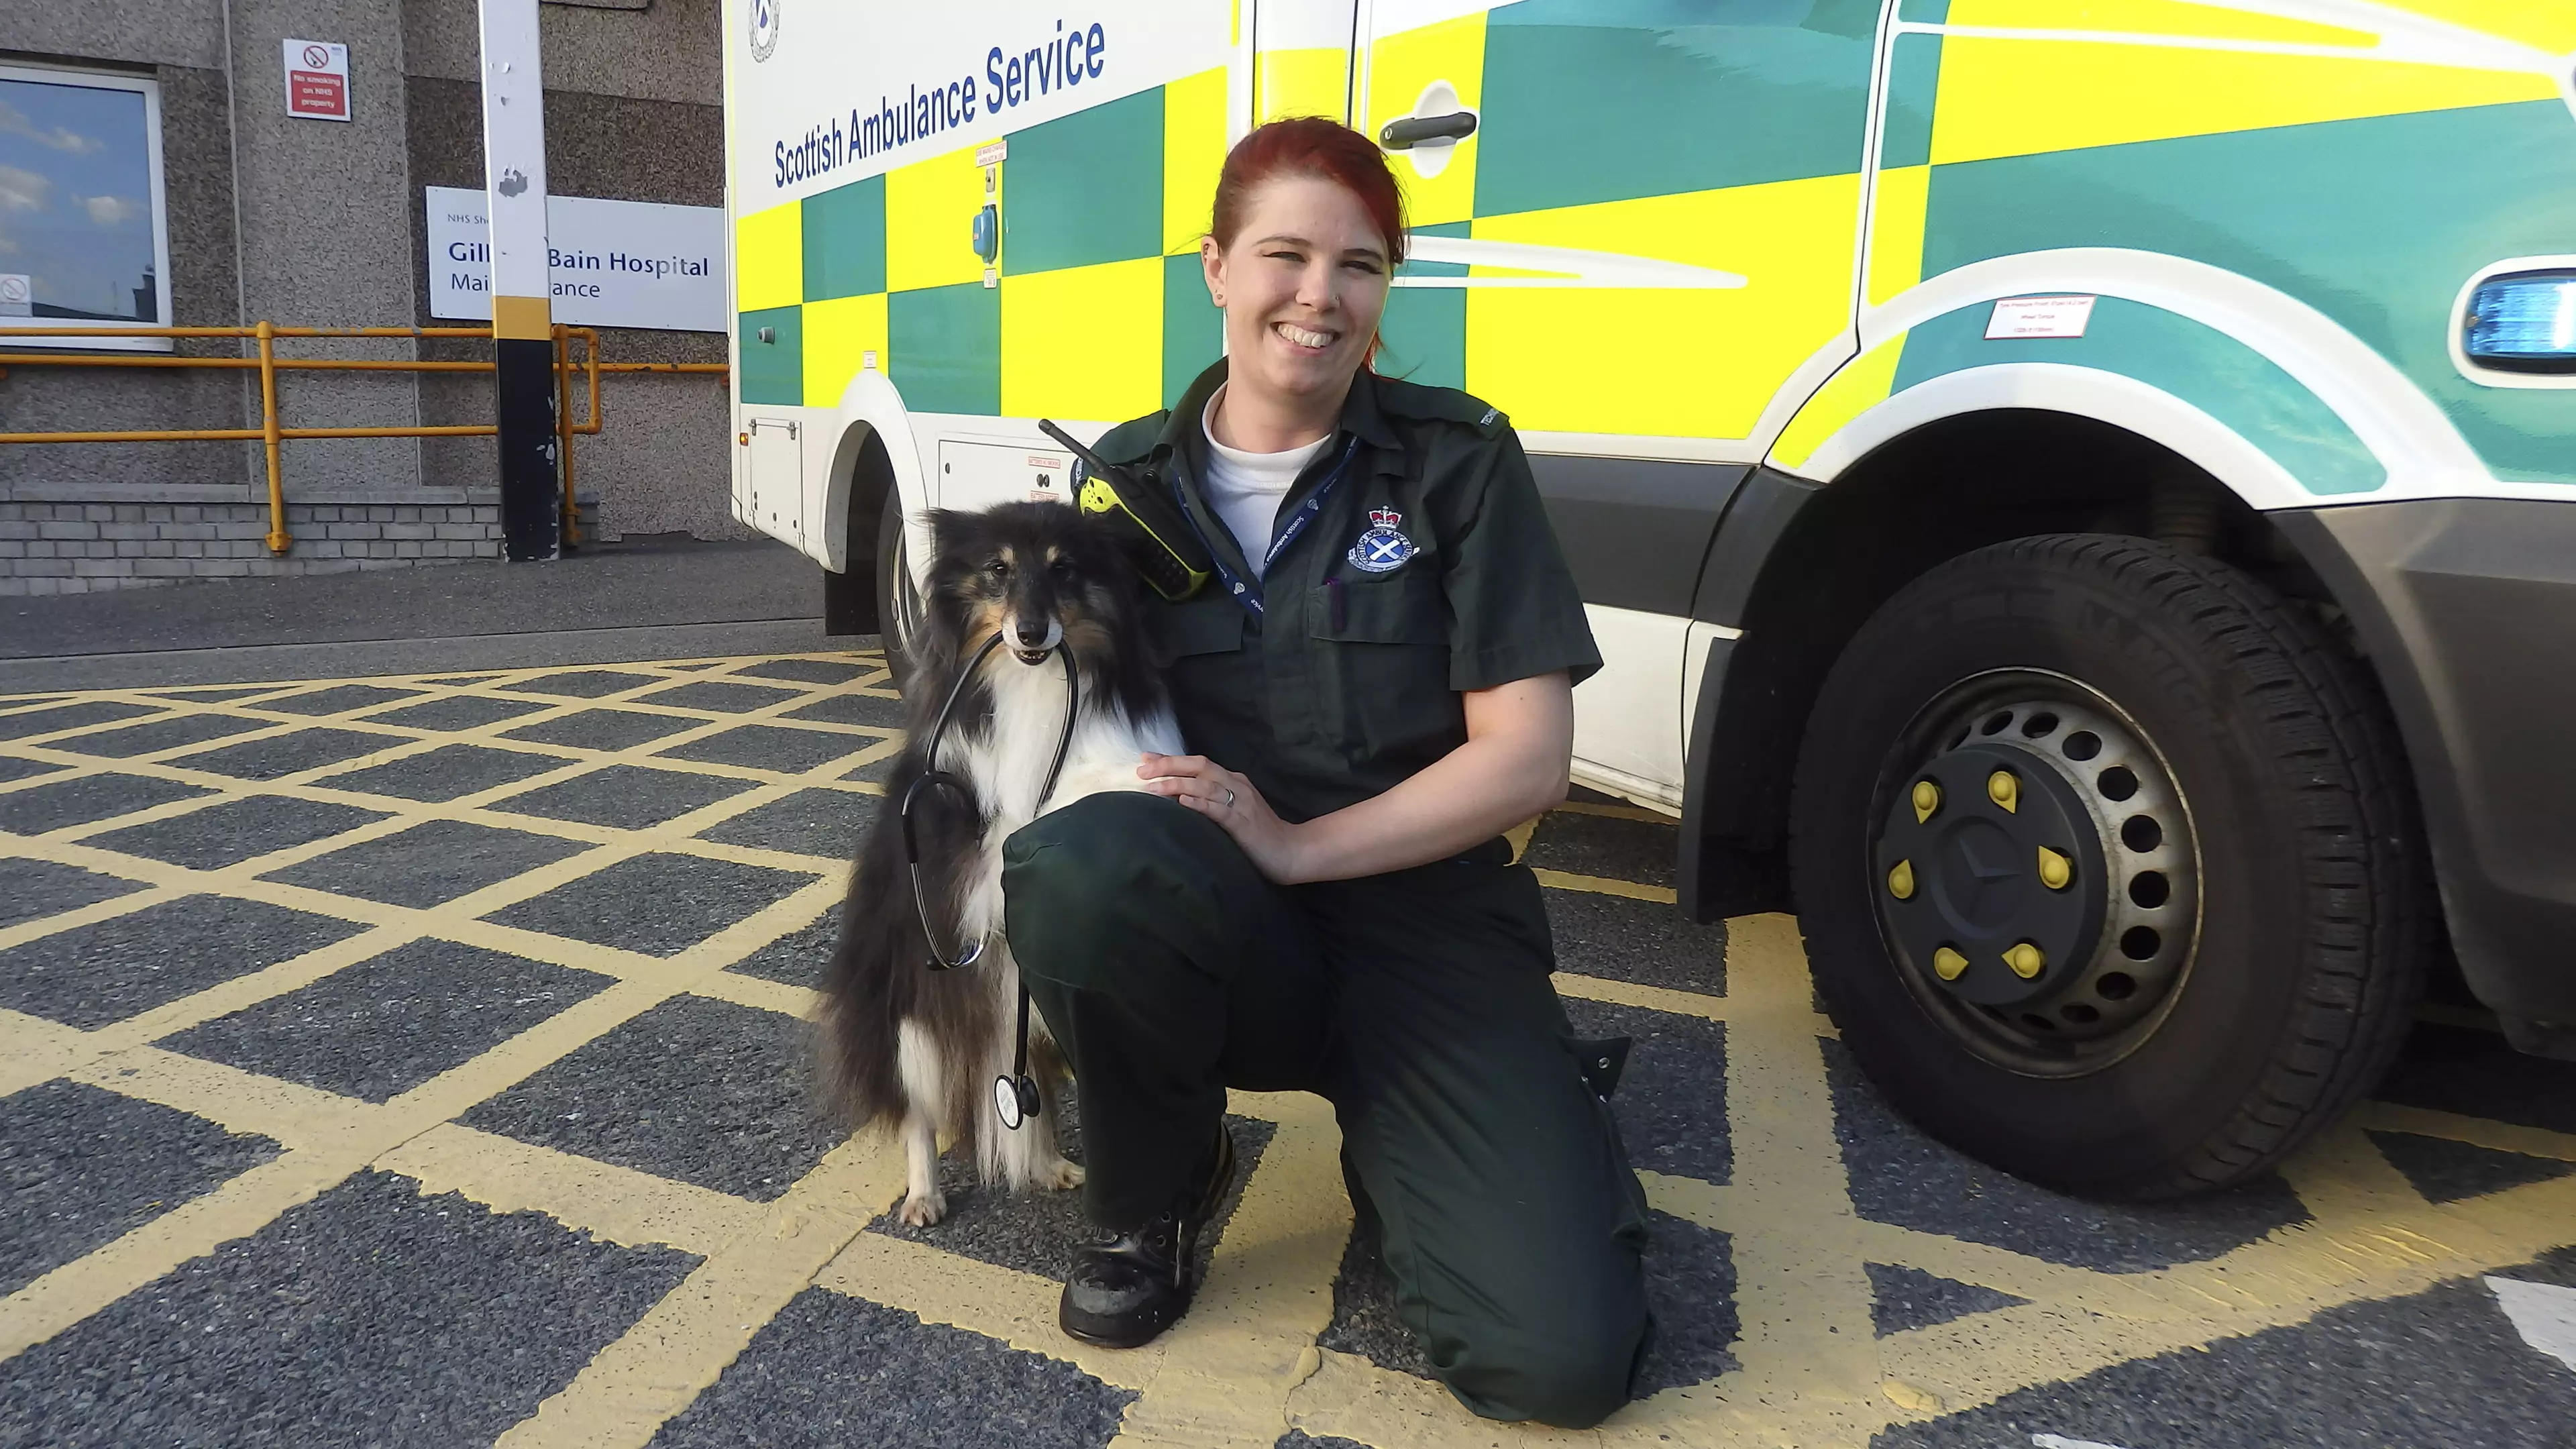 Kaylee is a paramedic and often shows her adorable pups to patients (